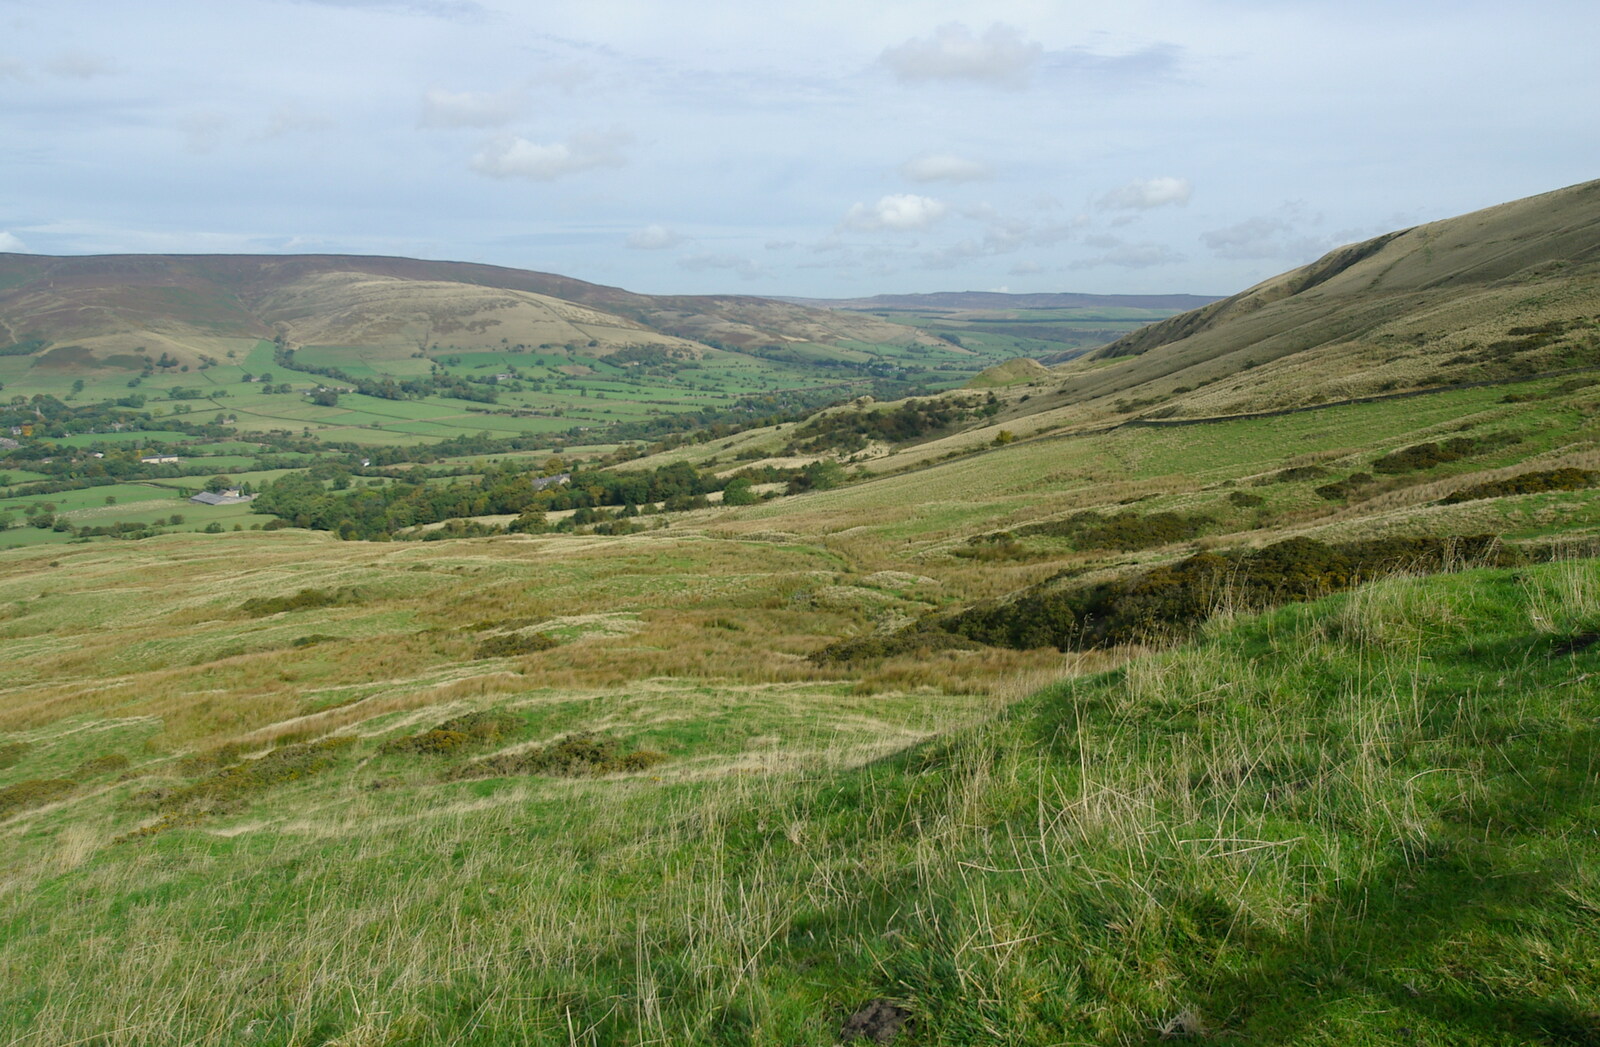 The Pennine Way: Lost on Kinder Scout, Derbyshire - 9th October 2005: A valley in between Whaley Bridge and Edale